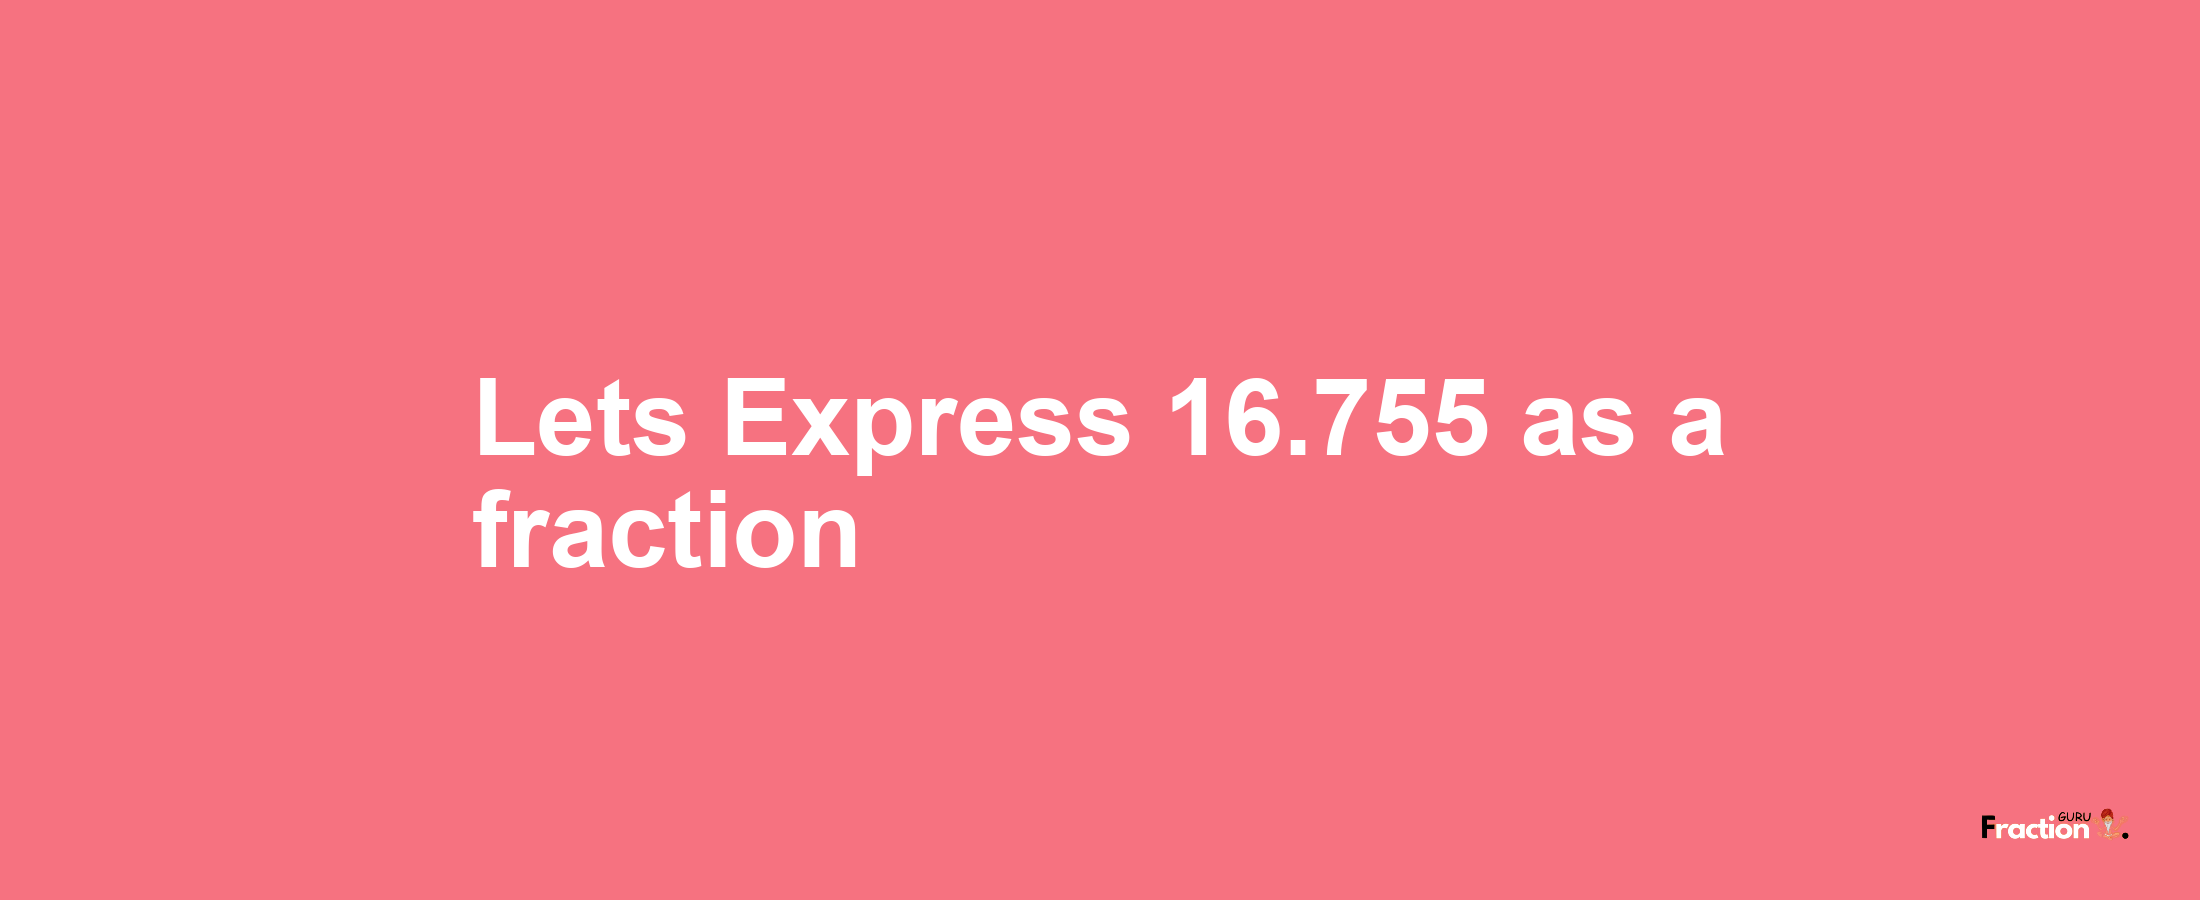 Lets Express 16.755 as afraction